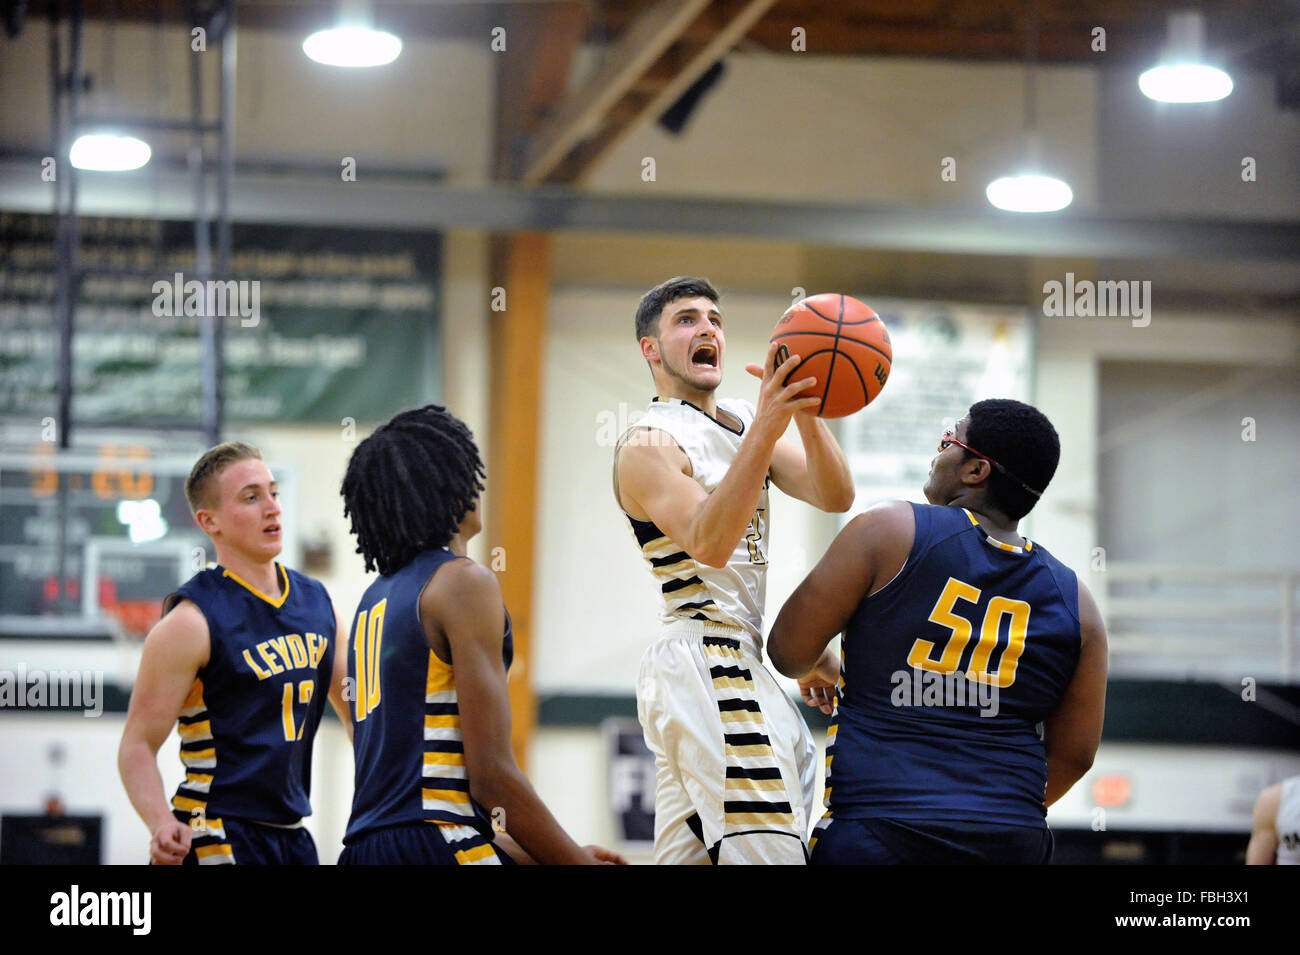 High school forward rising from the floor to get an open look at the basket prior to shooting among a trio of defenders. USA. Stock Photo